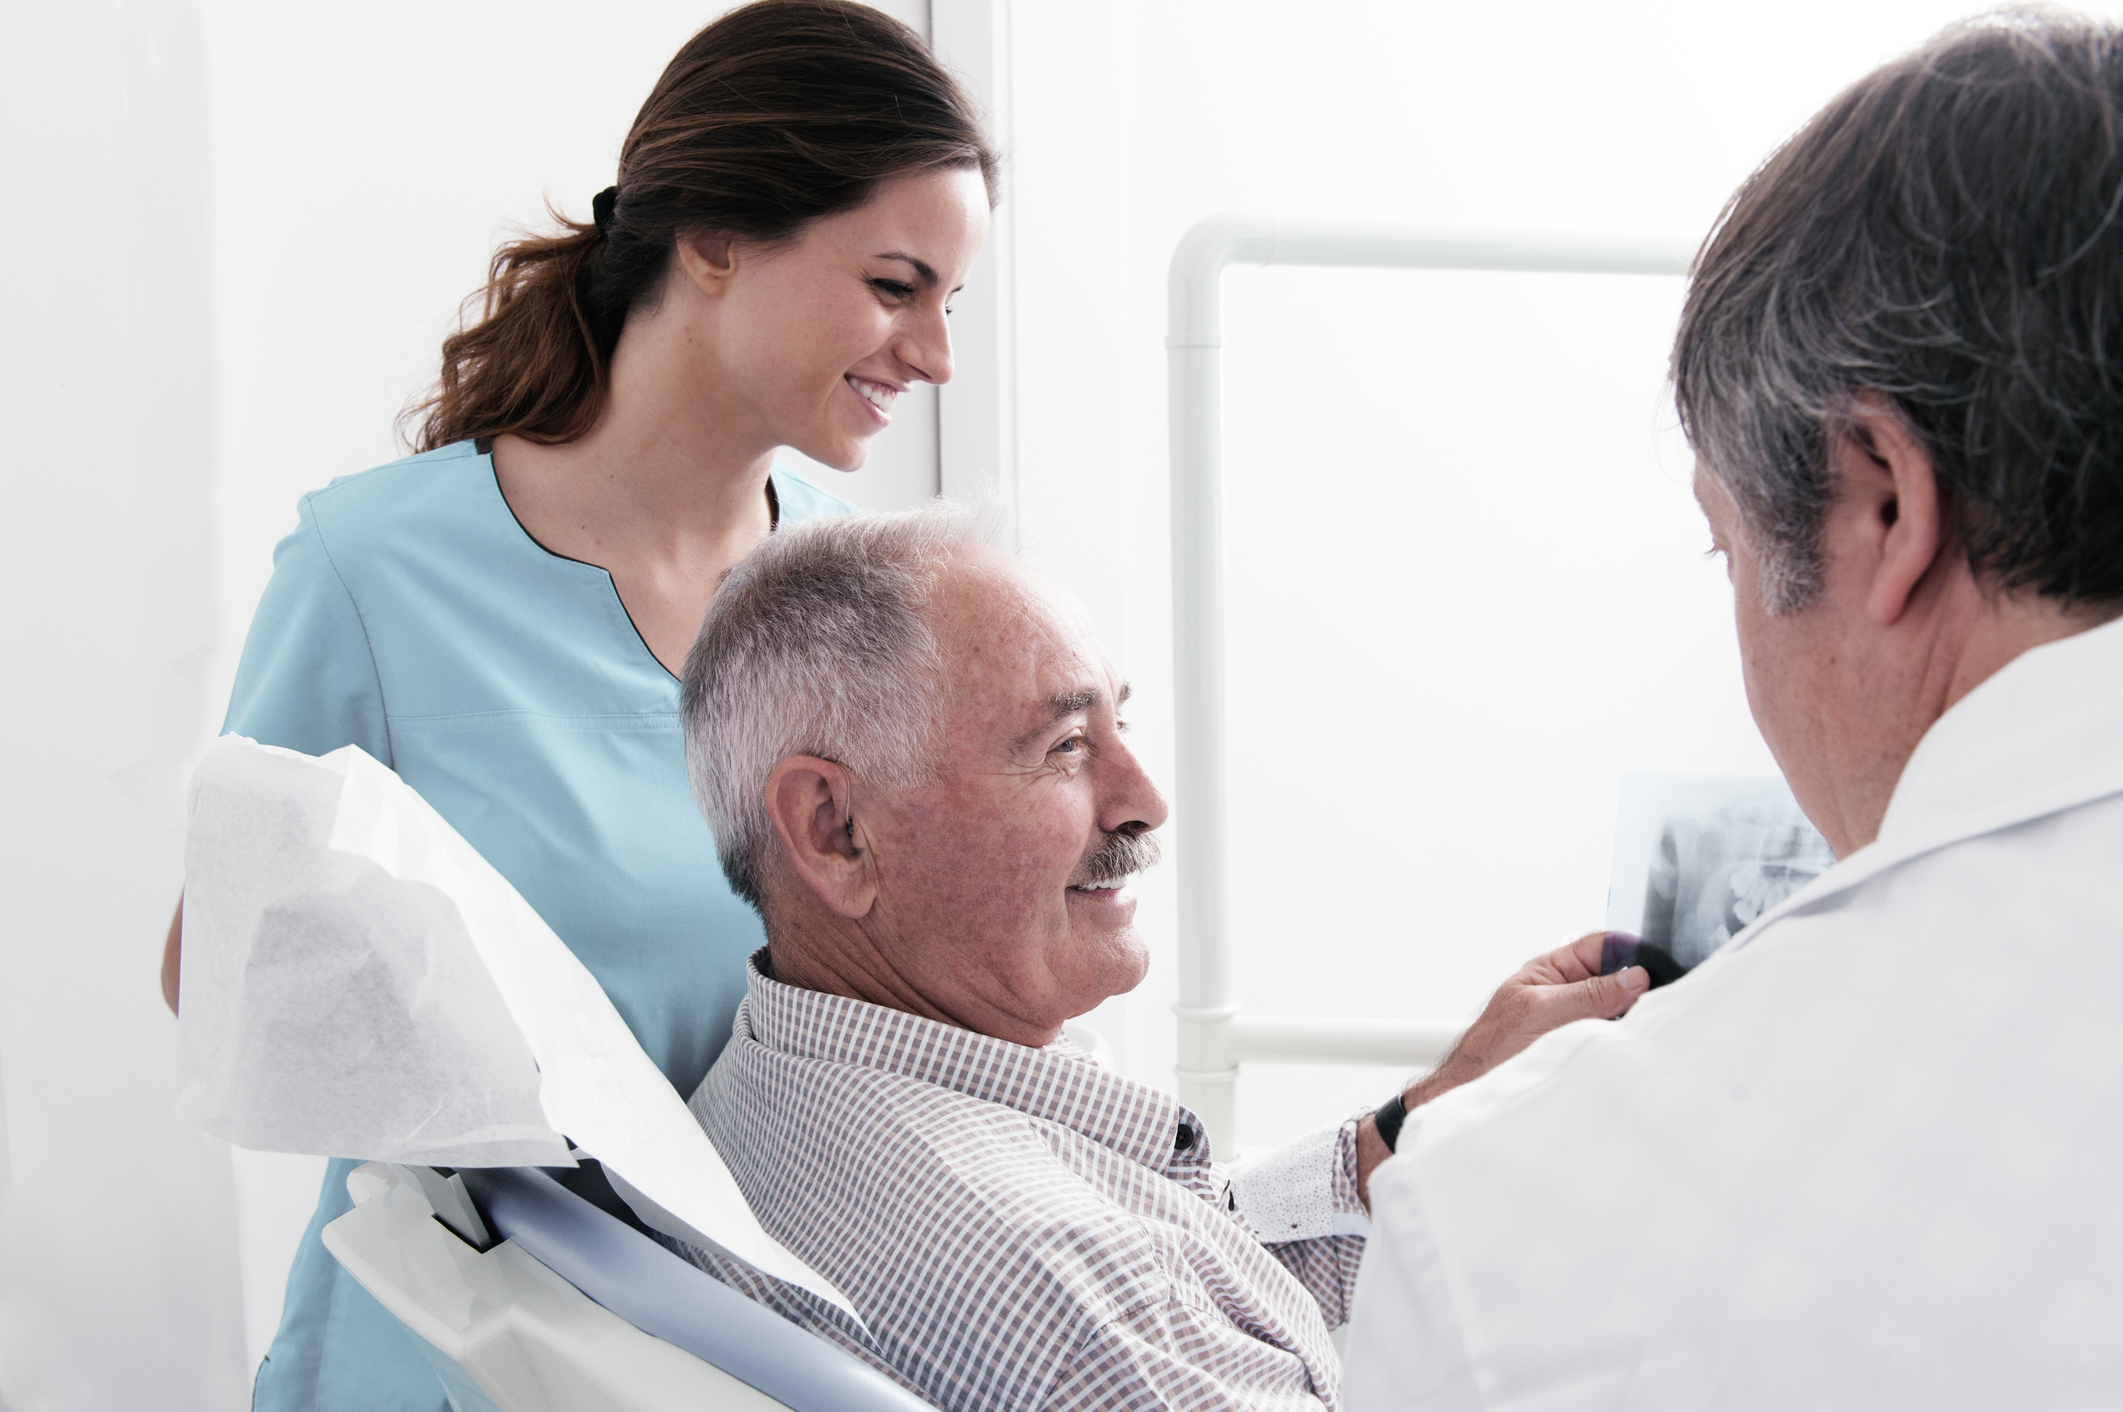 Senior citizen discussing his X-days with dentist